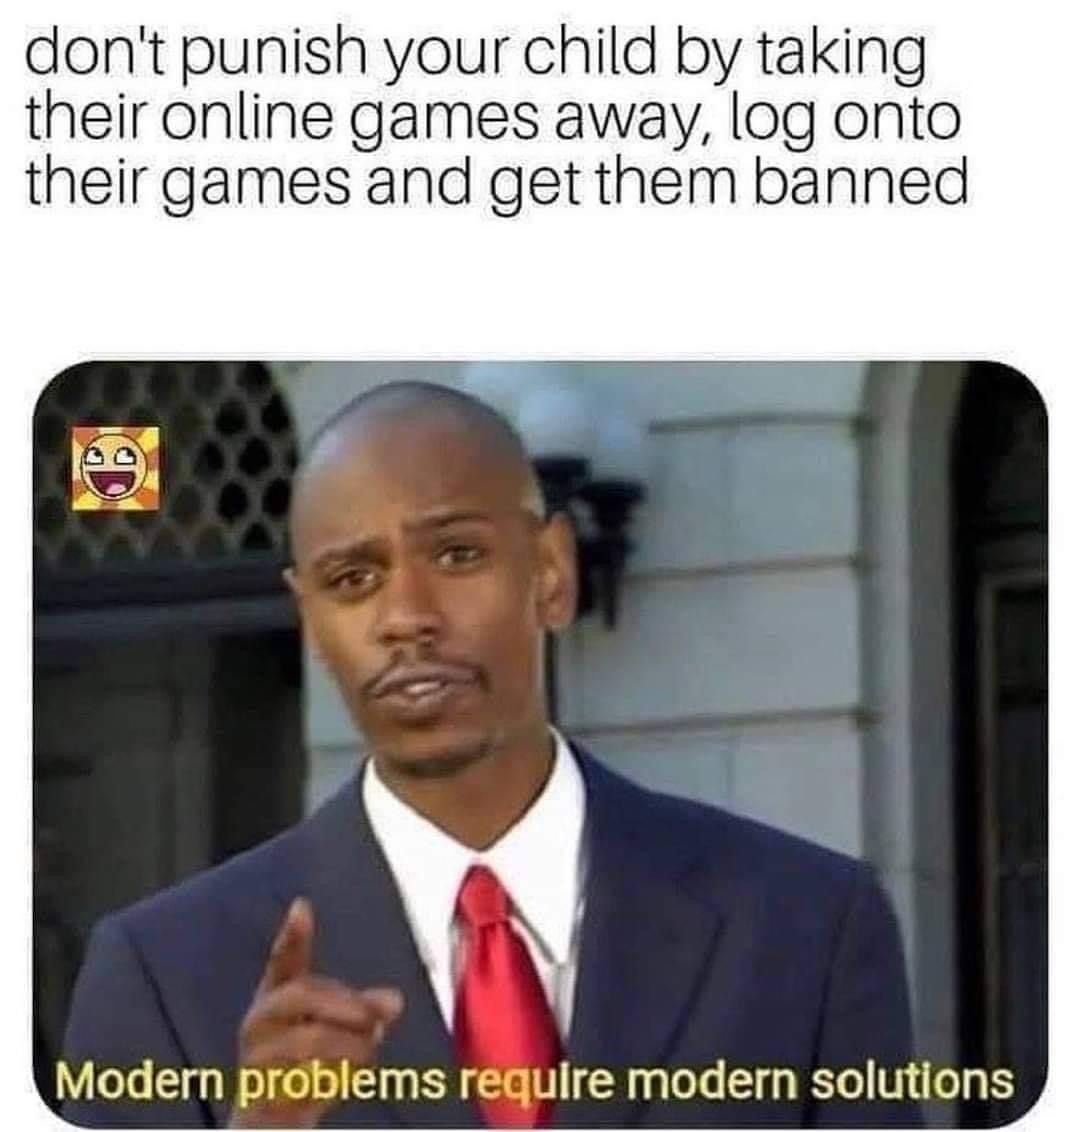 funny gaming memes - modern problems require modern solutions - don't punish your child by taking their online games away, log onto their games and get them banned Modern problems require modern solutions